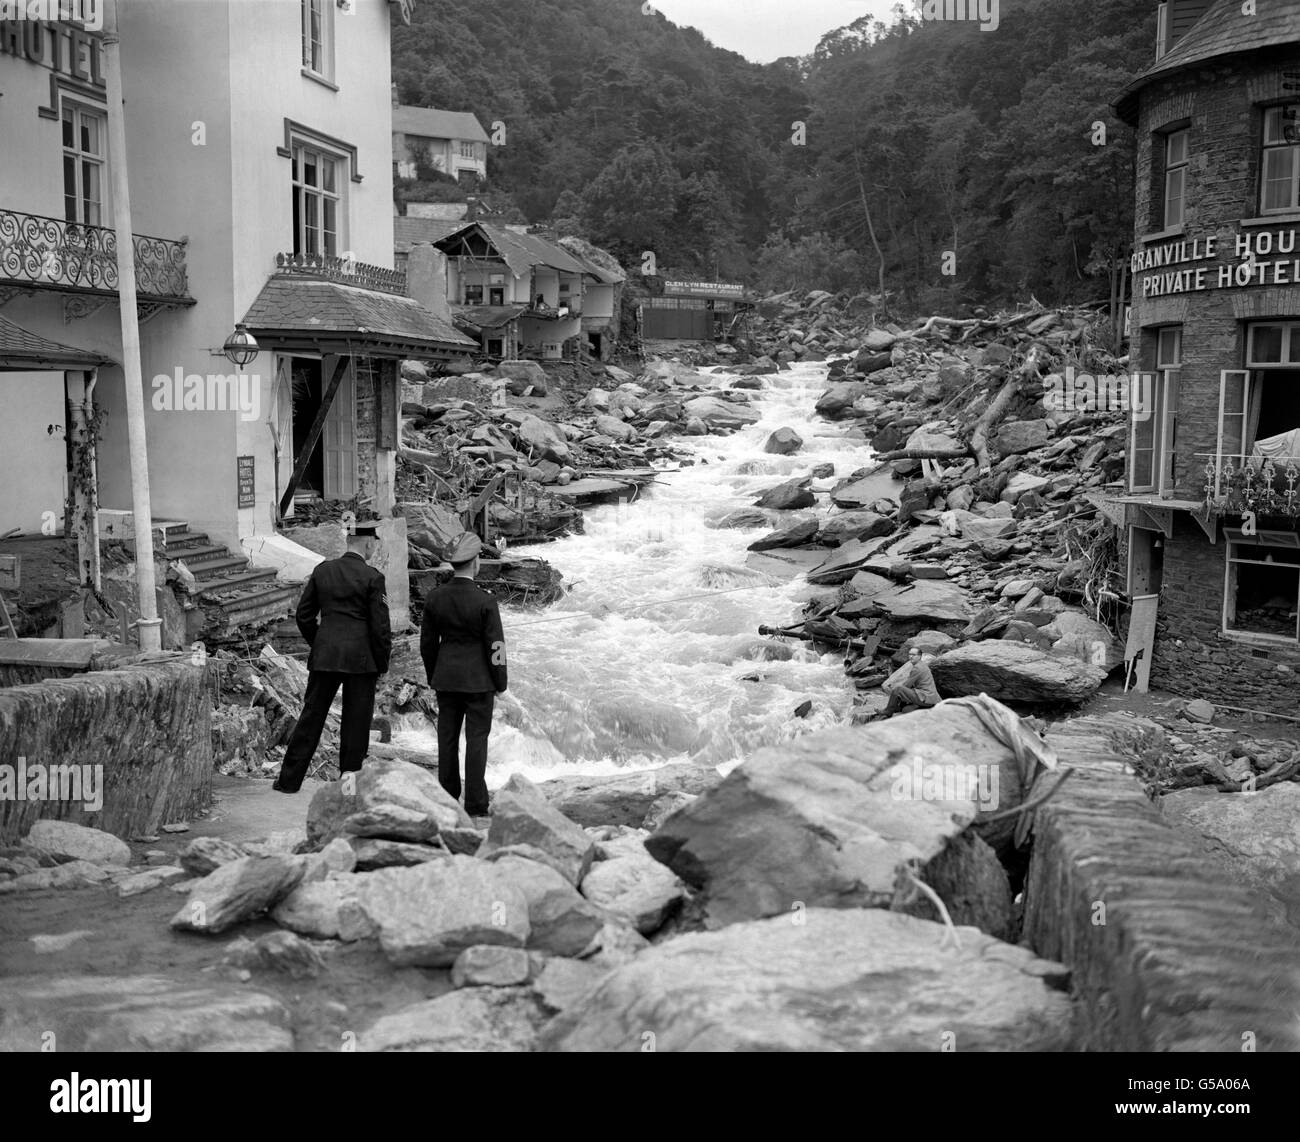 Weather - Lynmouth tidal wave - 1952. The aftermath of the devastating 'tidal wave' which swept through the Devon resorts of Lynmouth and Lynton. Stock Photo